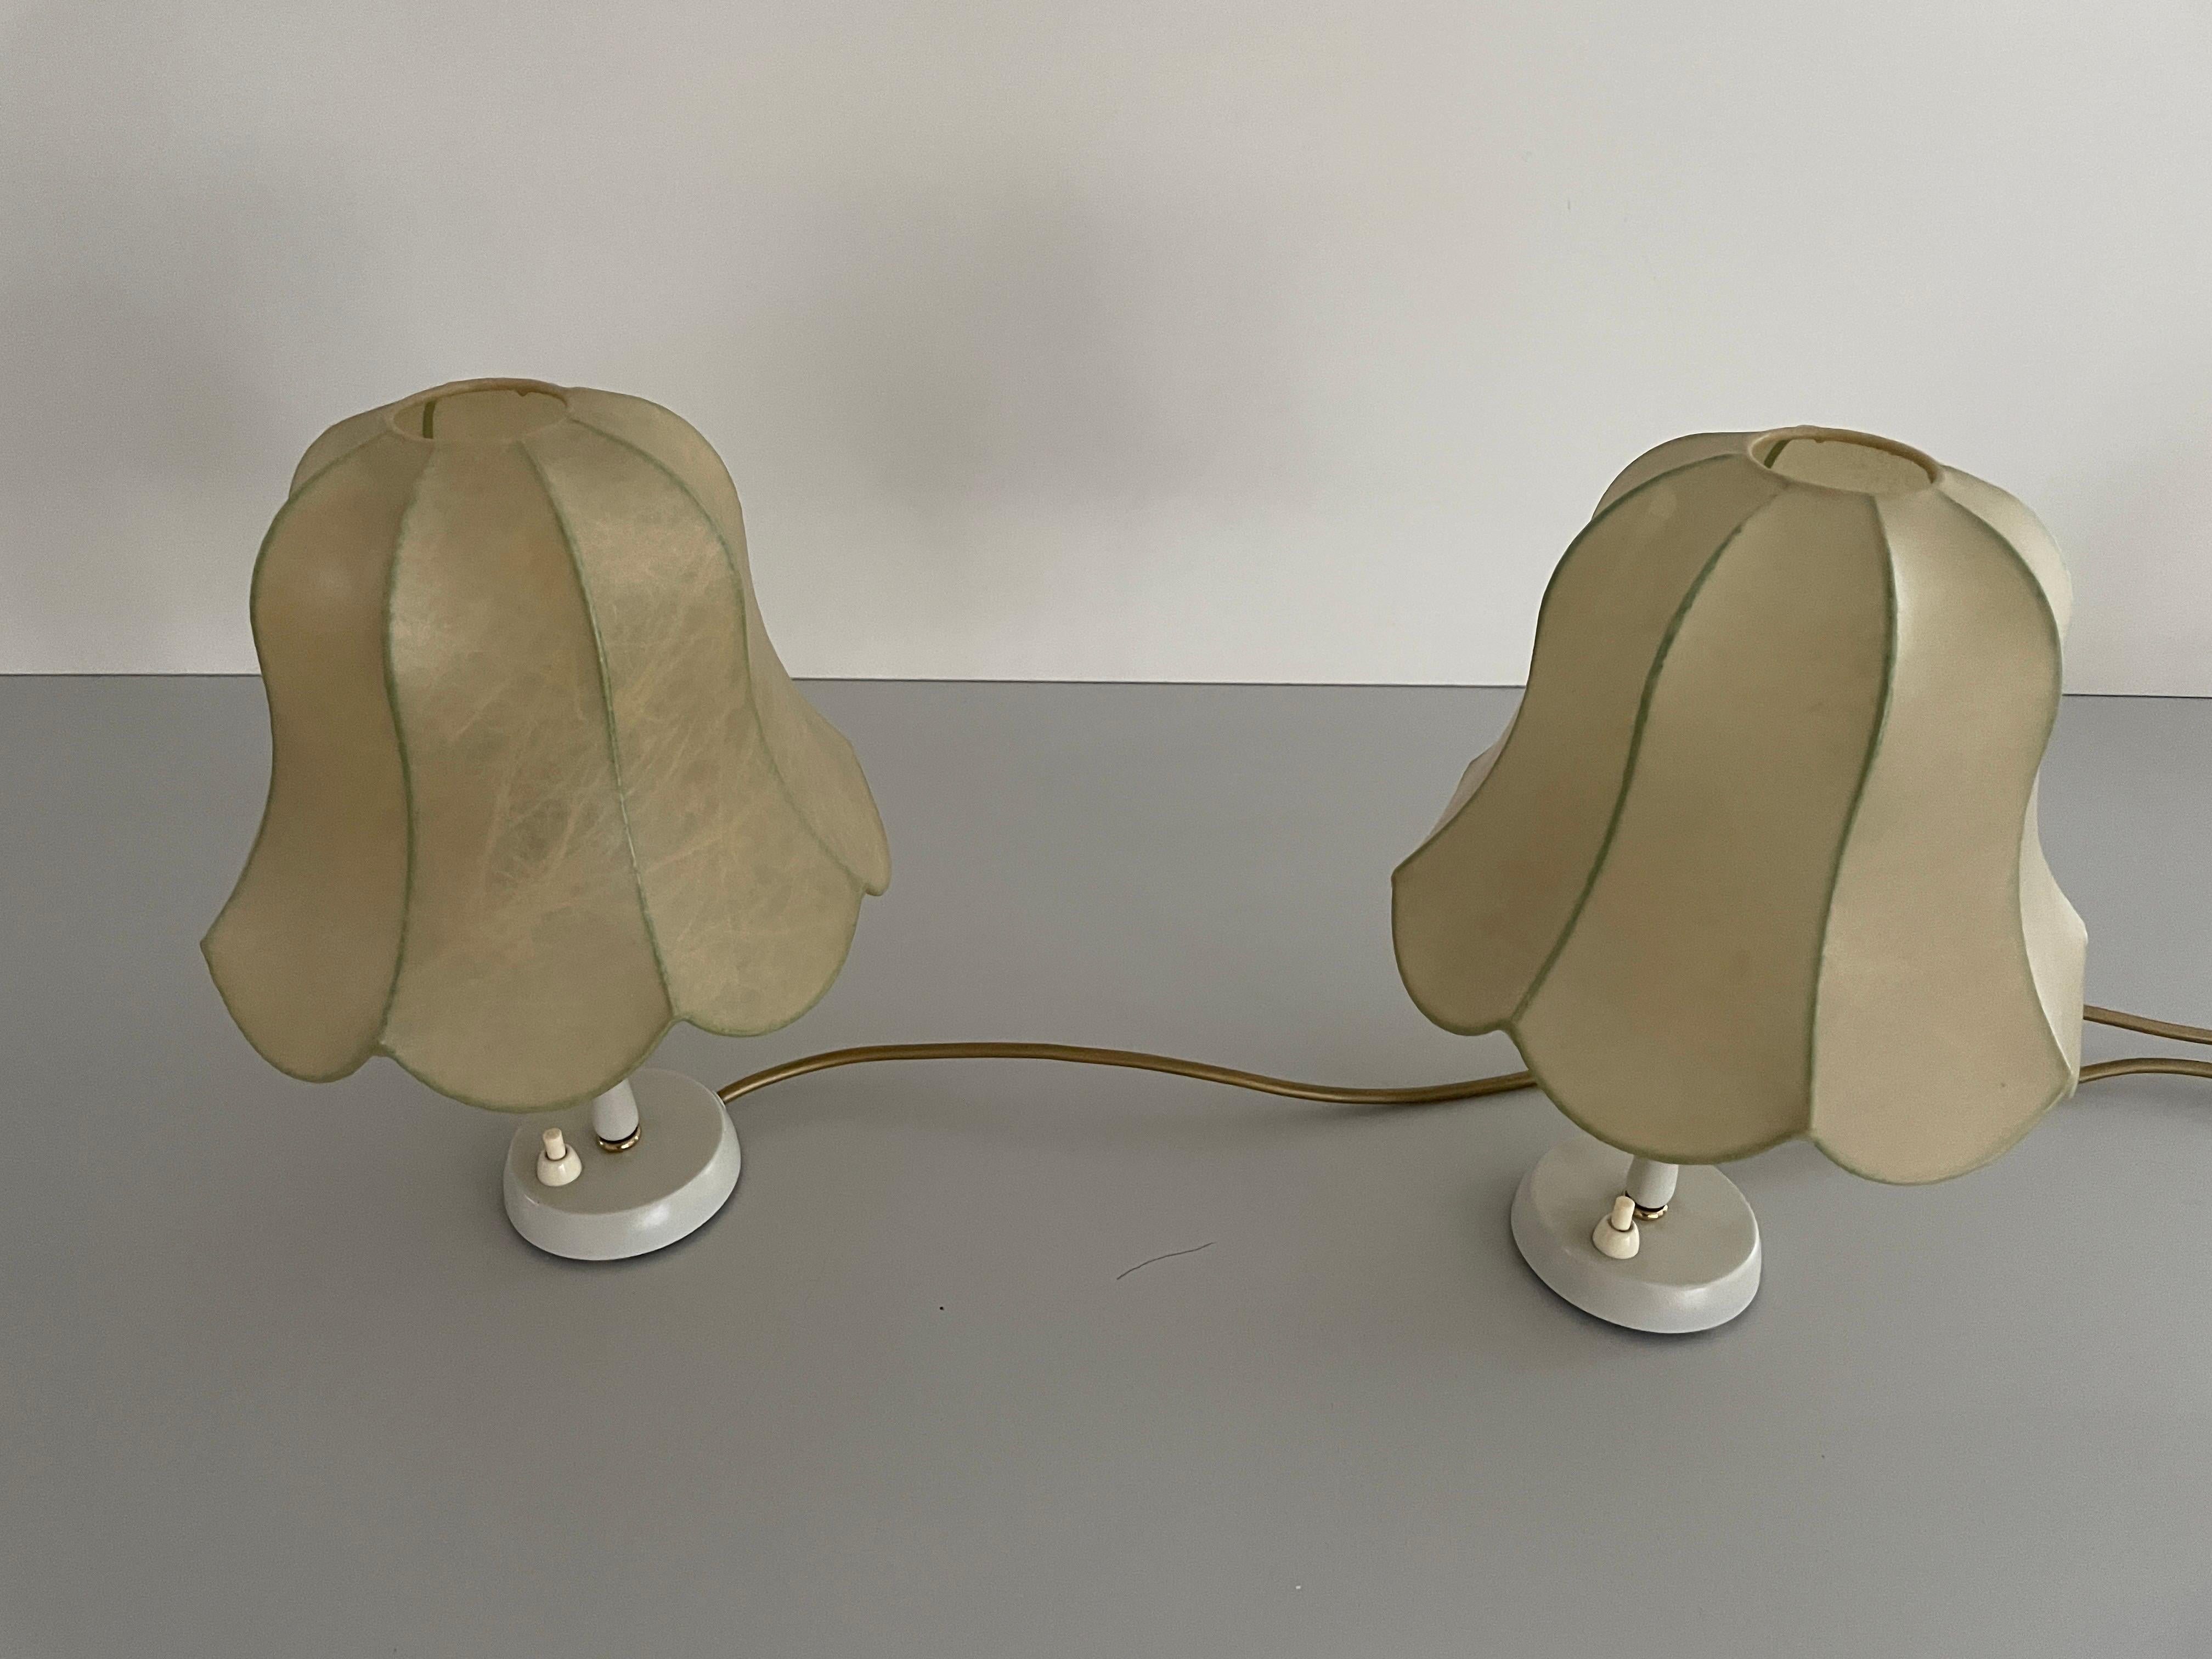 Cocoon Shade Metal Body Pair of Bedside Lamps by GOLDKANT, 1970s, Germany In Good Condition For Sale In Hagenbach, DE